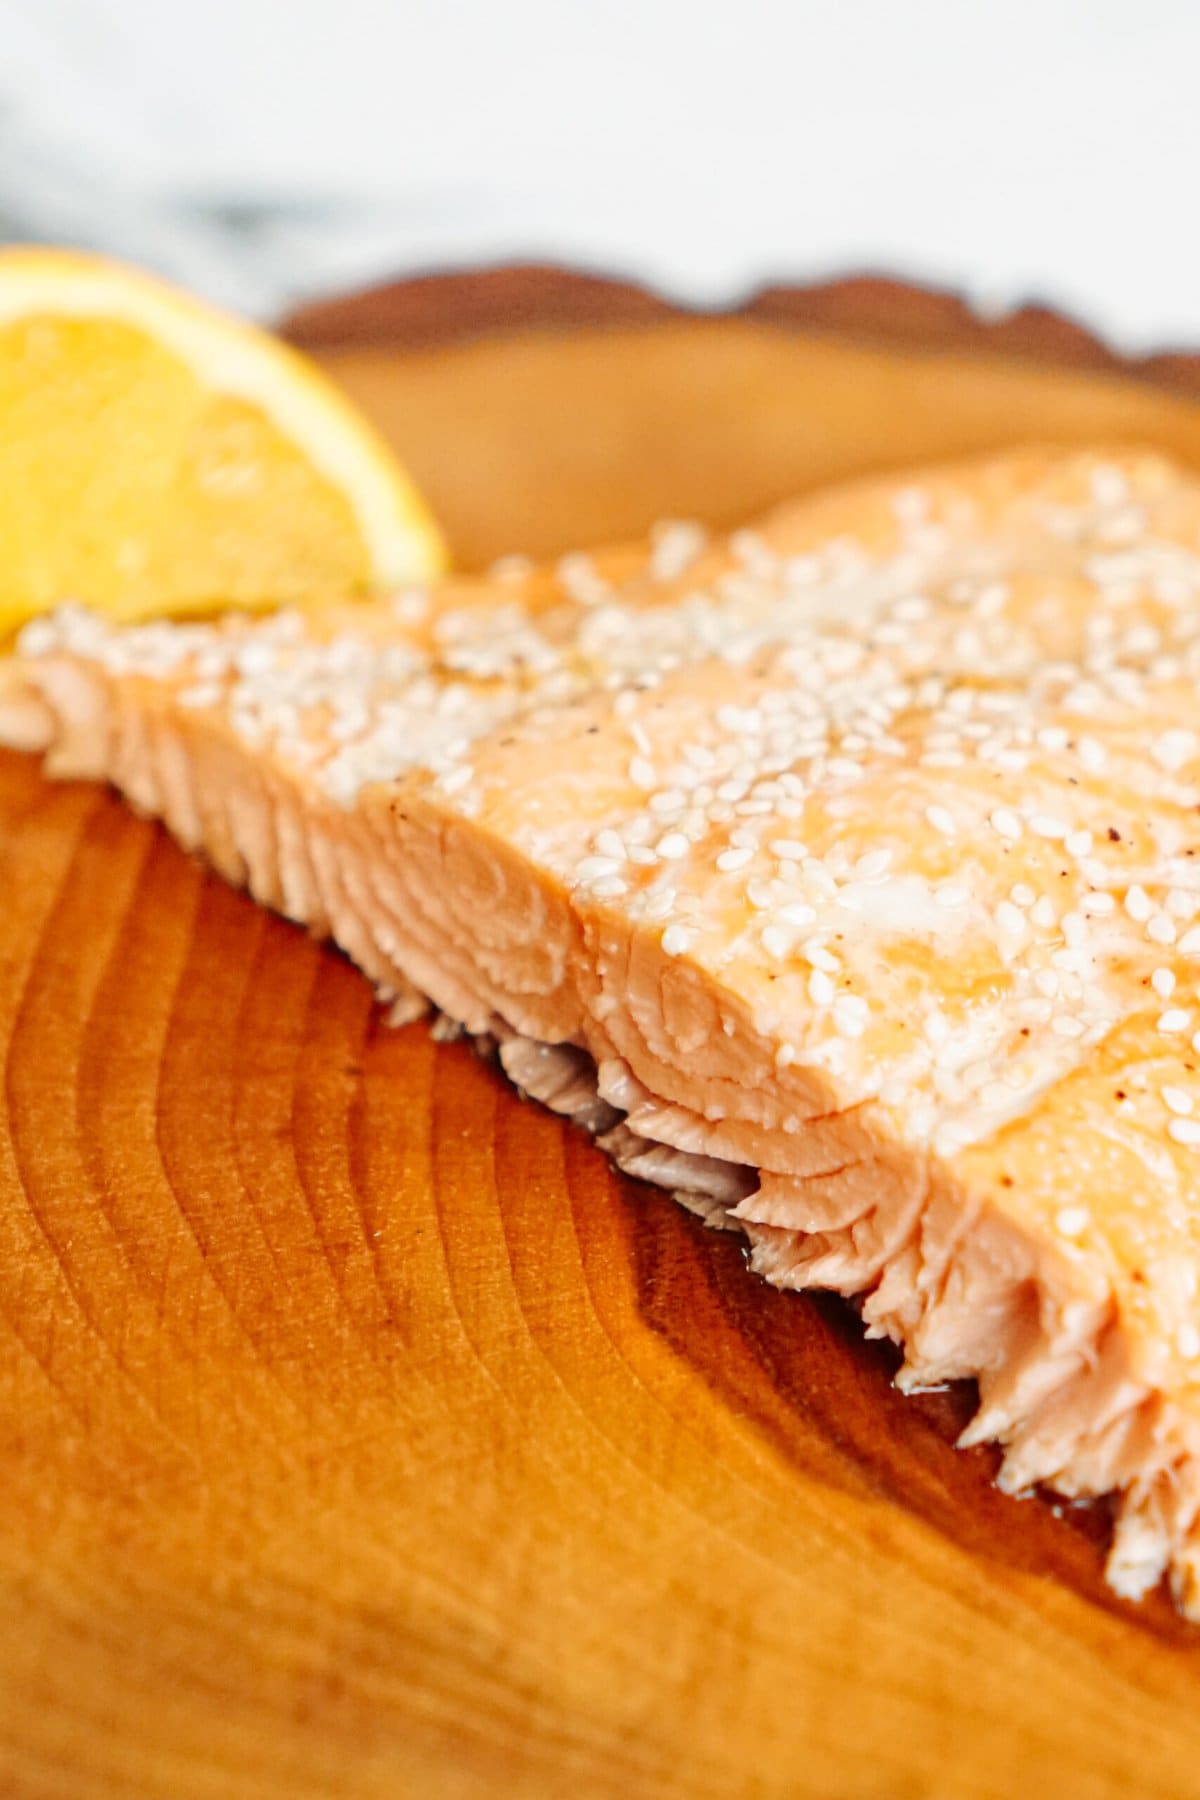 Salmon with sesame seeds on a wooden cutting board.